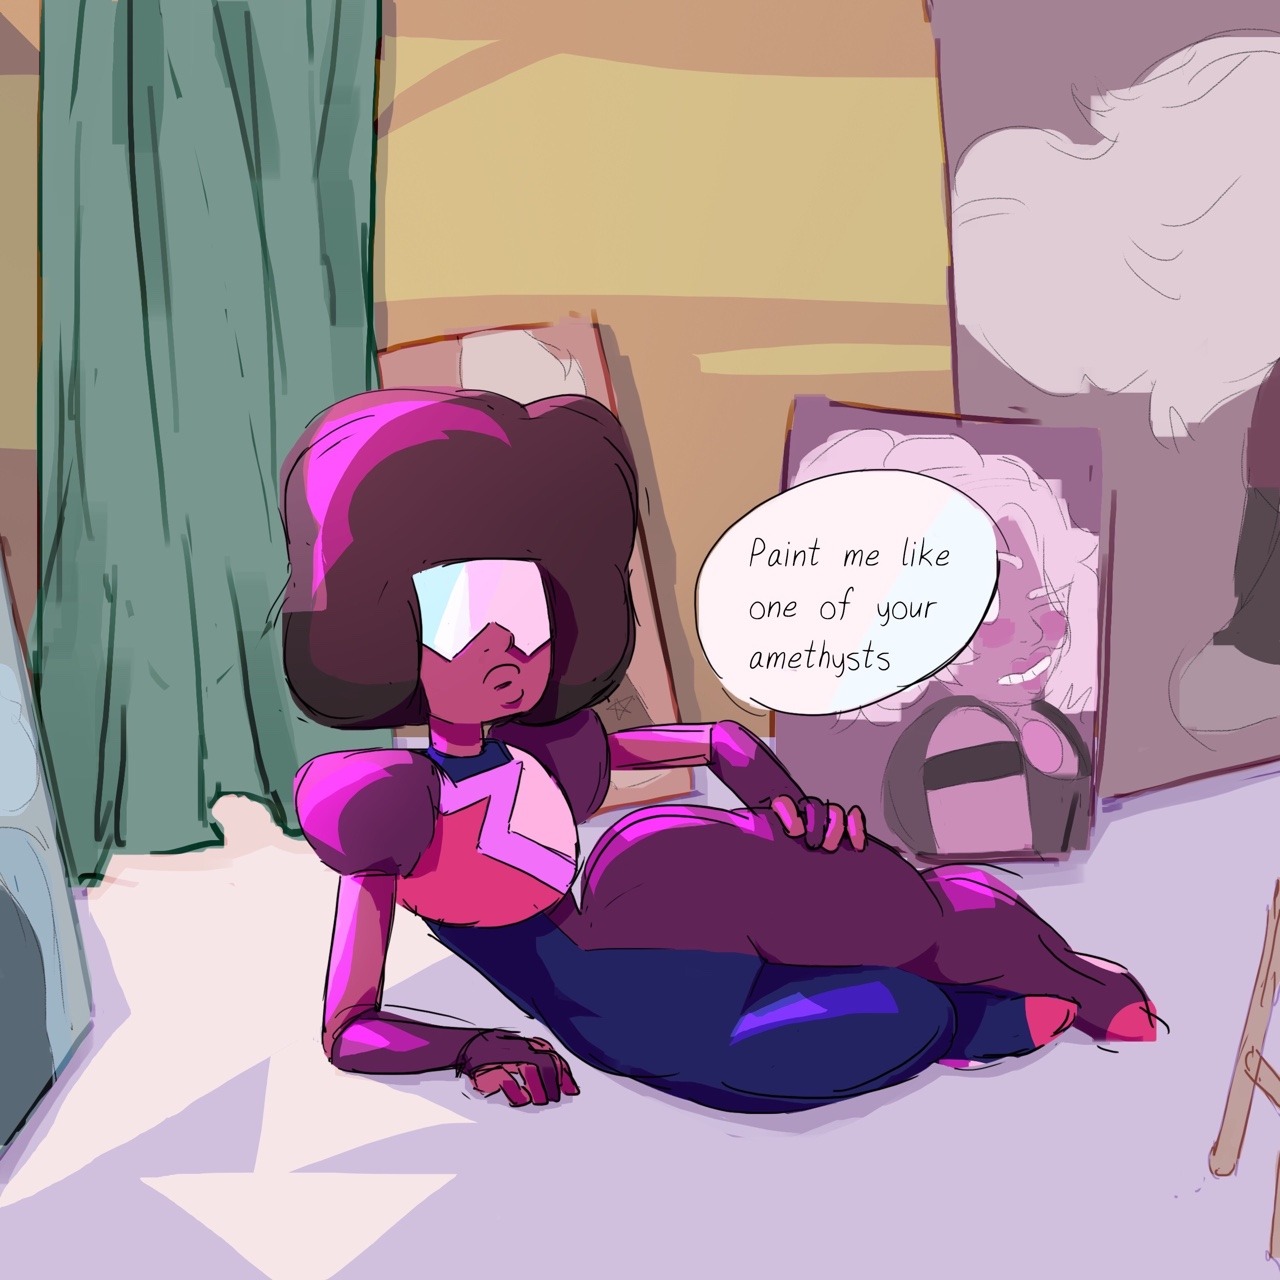 “Paint me like one of your amethysts” Loved the new episodes :D